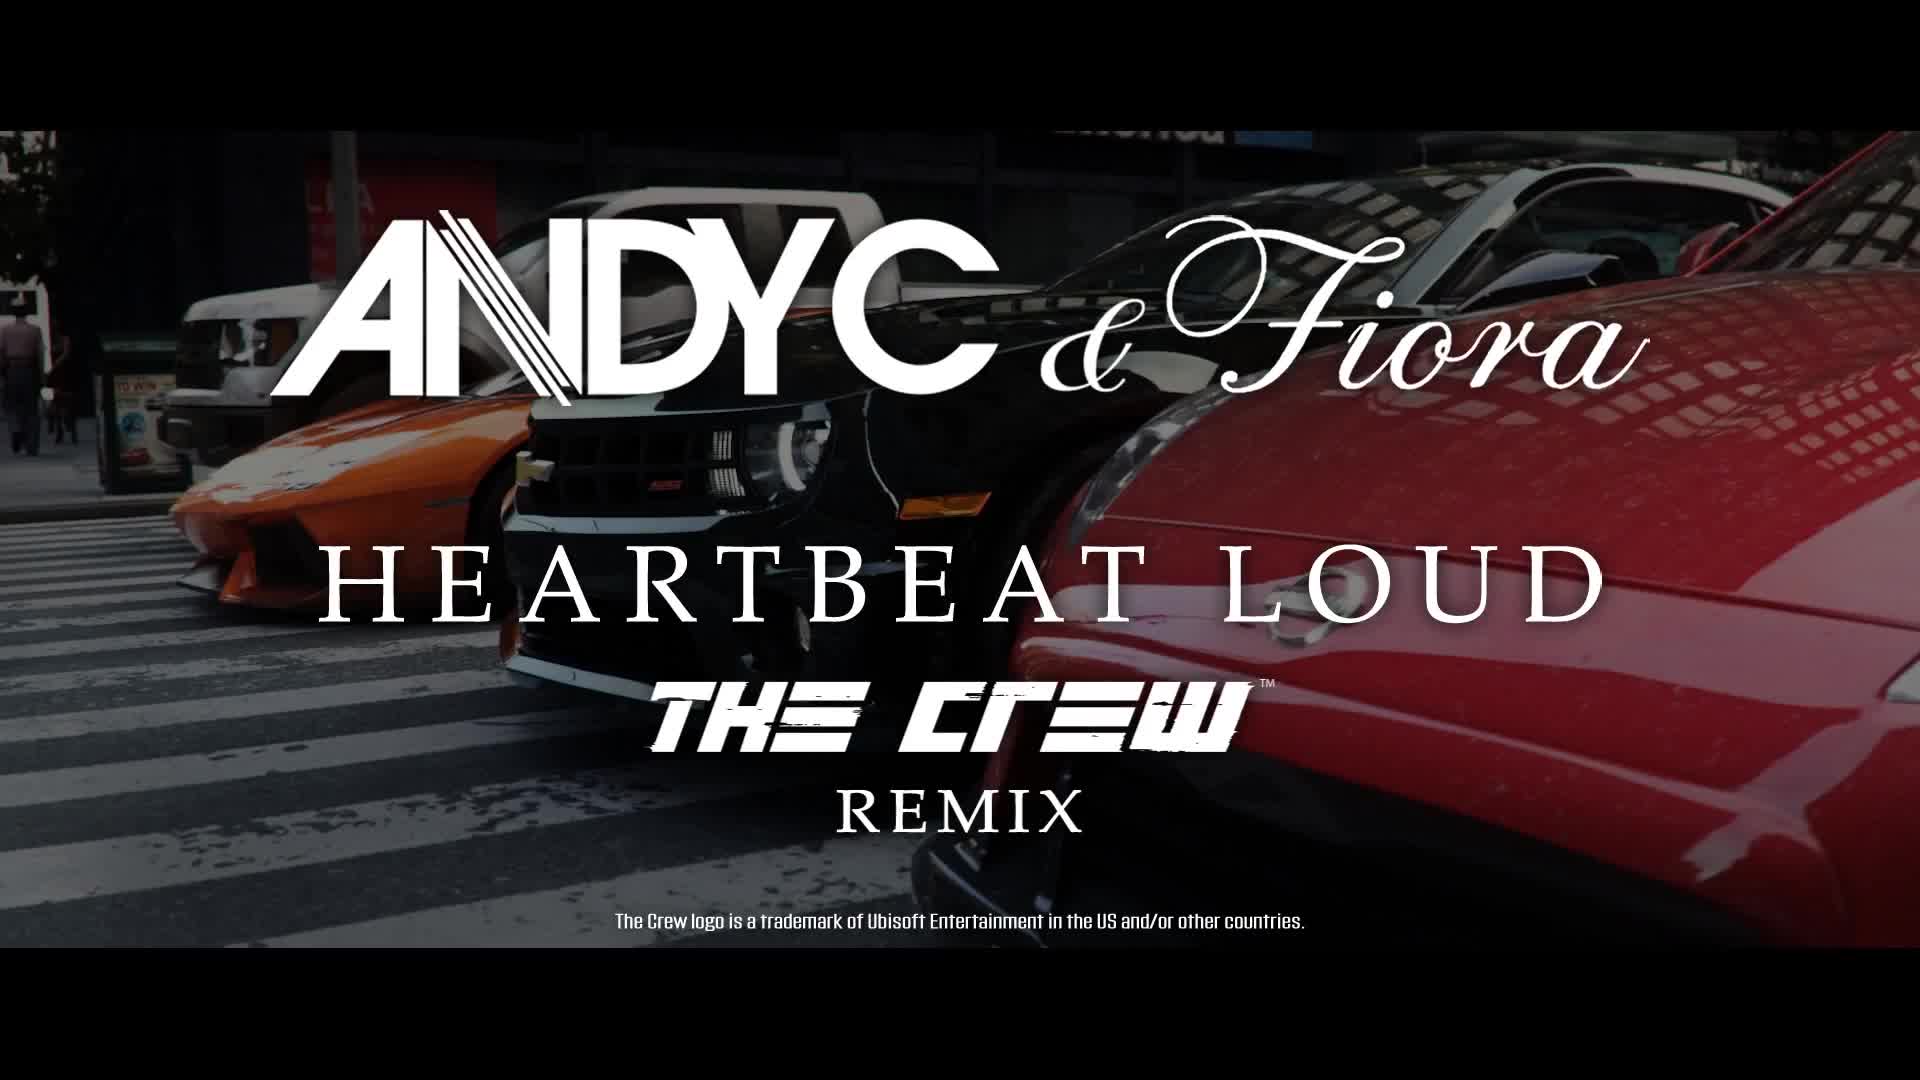 The Crew - Andy C - Heartbeat Loud